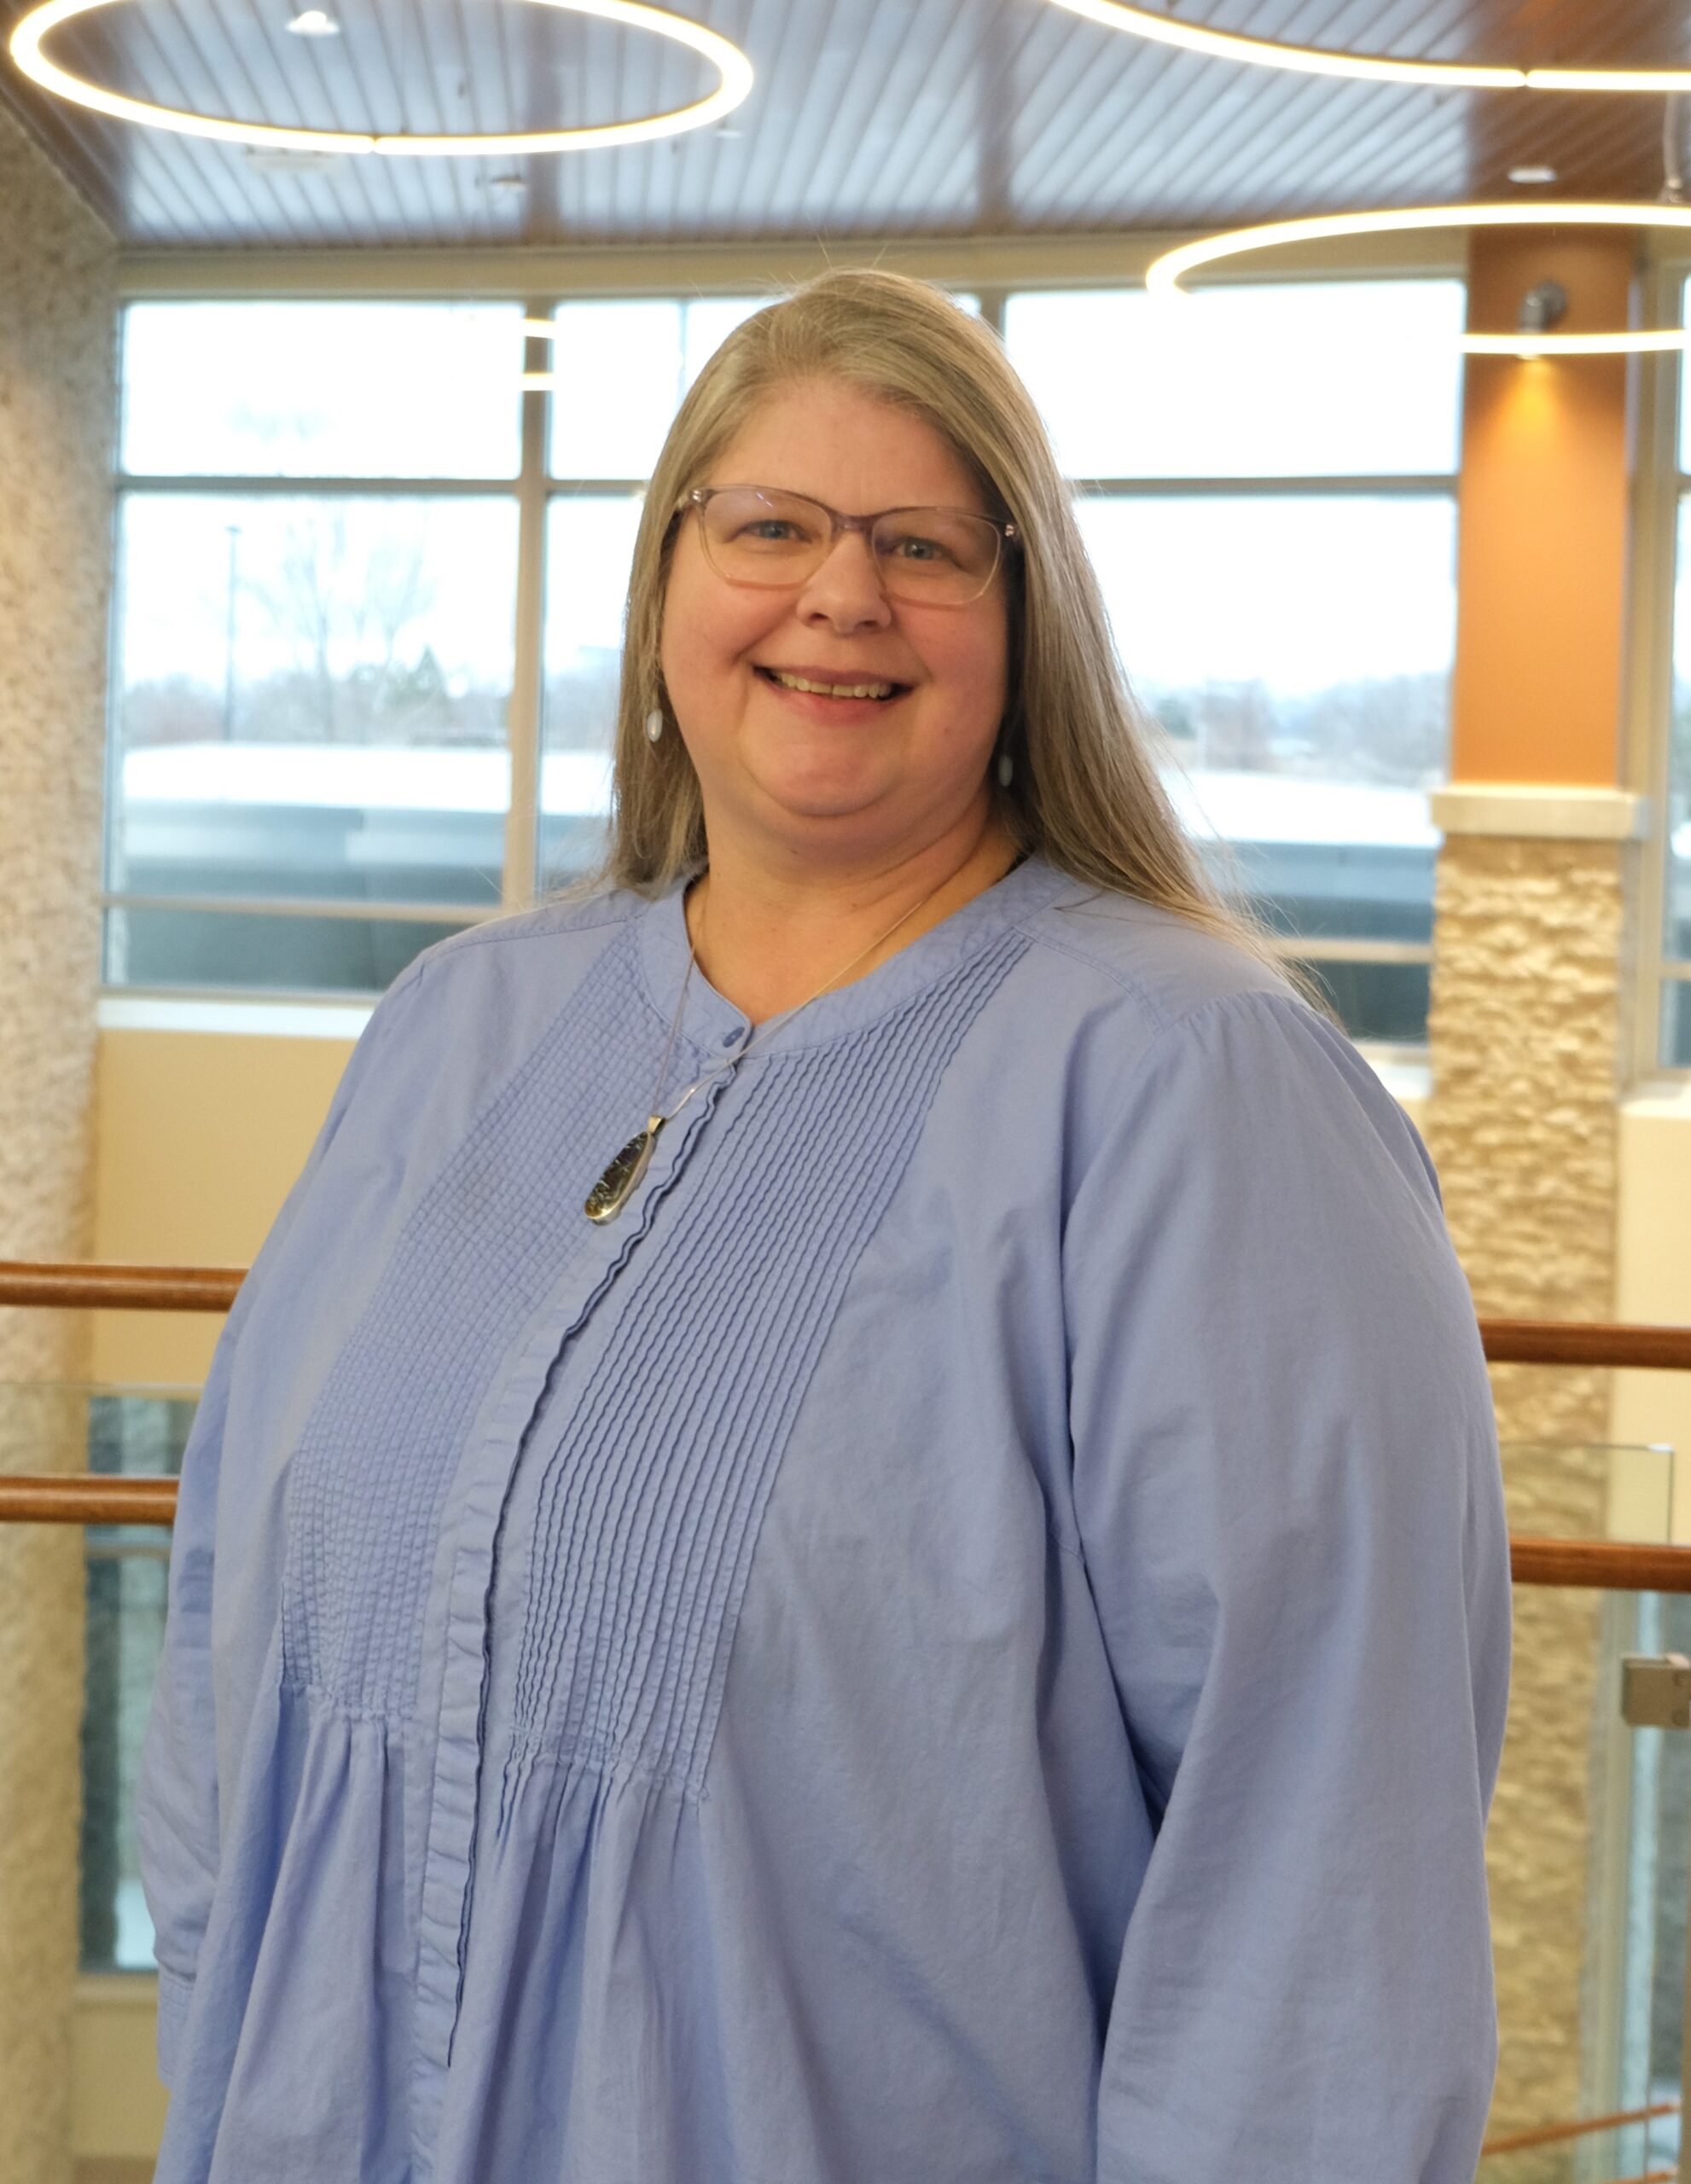 photo of Karen who is a member of the Southwest Memorial Hospital Foundation